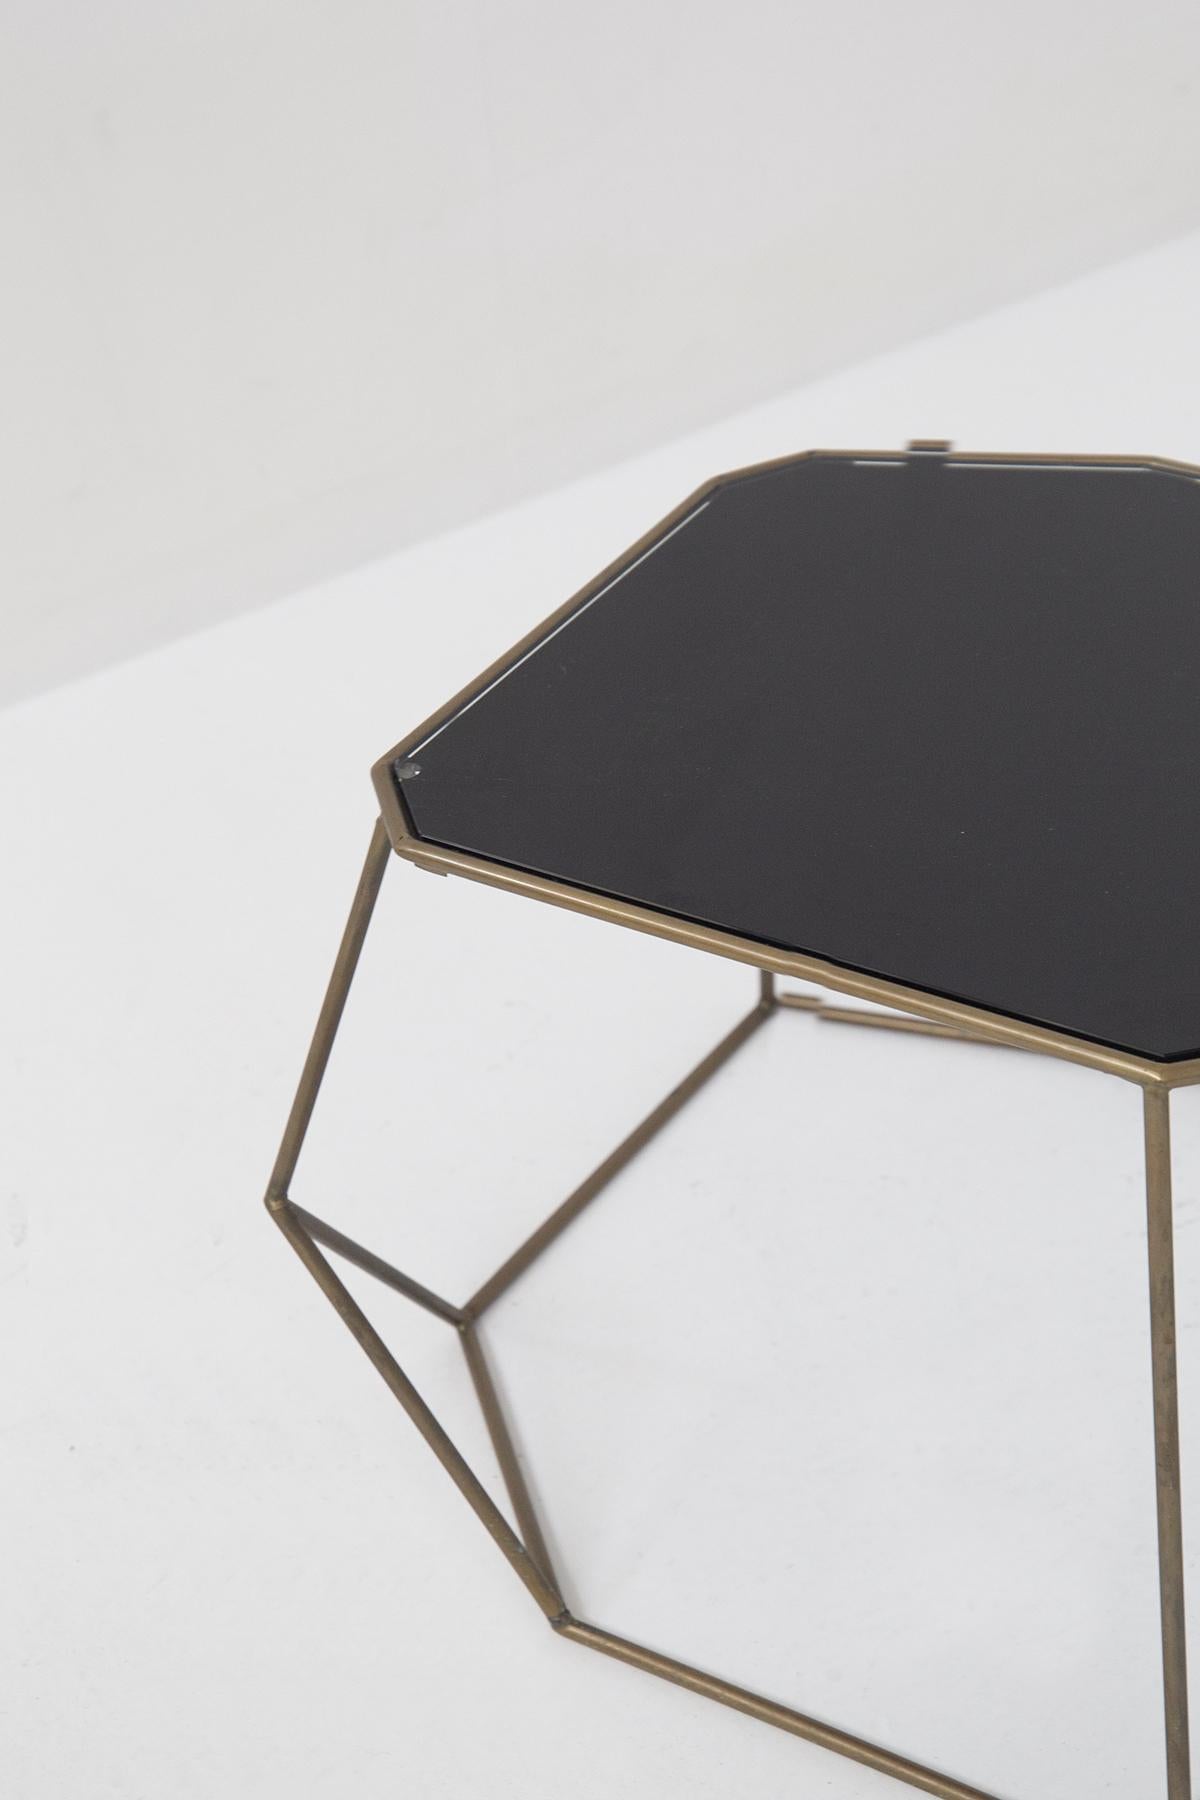 Beautiful pair of fine Italian-made coffee tables from the 20th century. 
The frame is made of brass tubing in perfect patina of very asymmetrical and playful geometric shapes, simply spectacular. The top is also asymmetrical in shape and is made